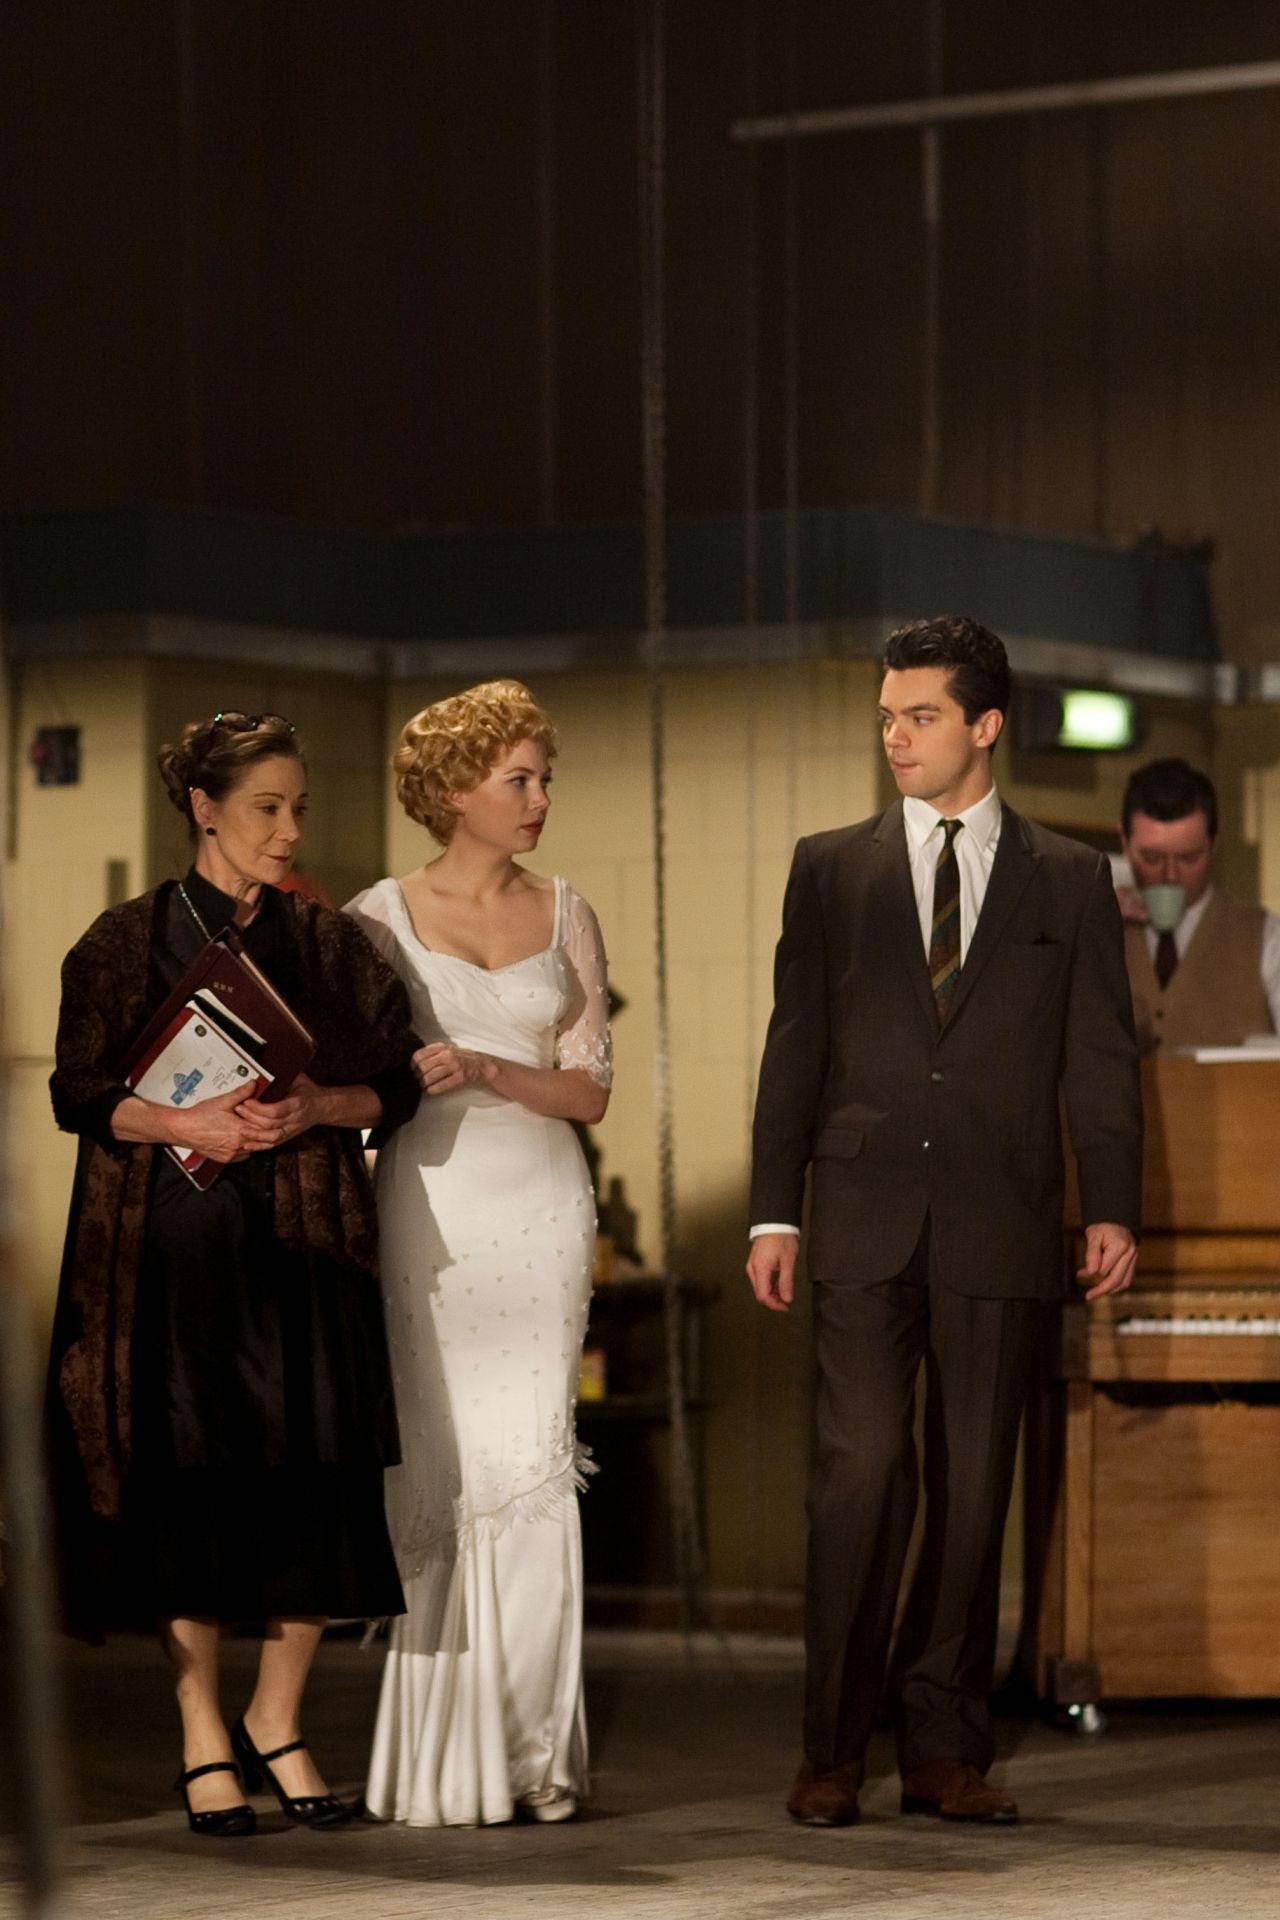 Zoe Wanamaker, Michelle Williams and Dominic Cooper in The Weinstein Company's My Week with Marilyn (2011). Photo credit by Laurence Cendrowicz.